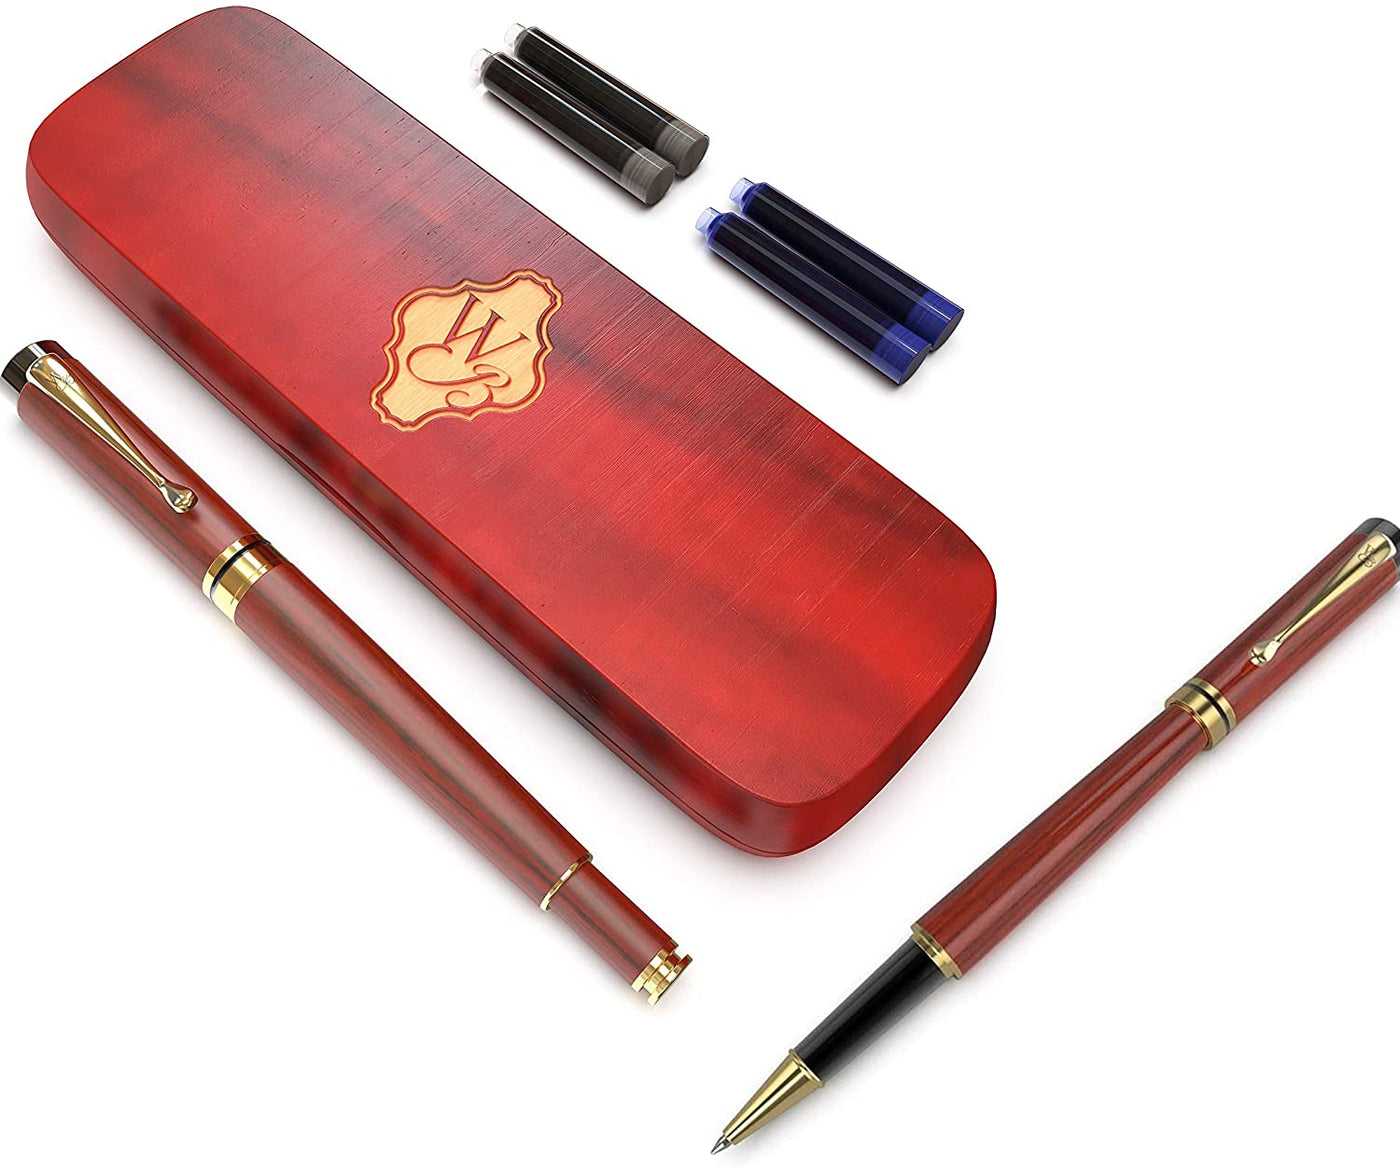 Wordsworth and Black's Bundle of Luxury Wooden Bamboo Fountain Pen and Wooden Rollerball Pen (Rosewood)